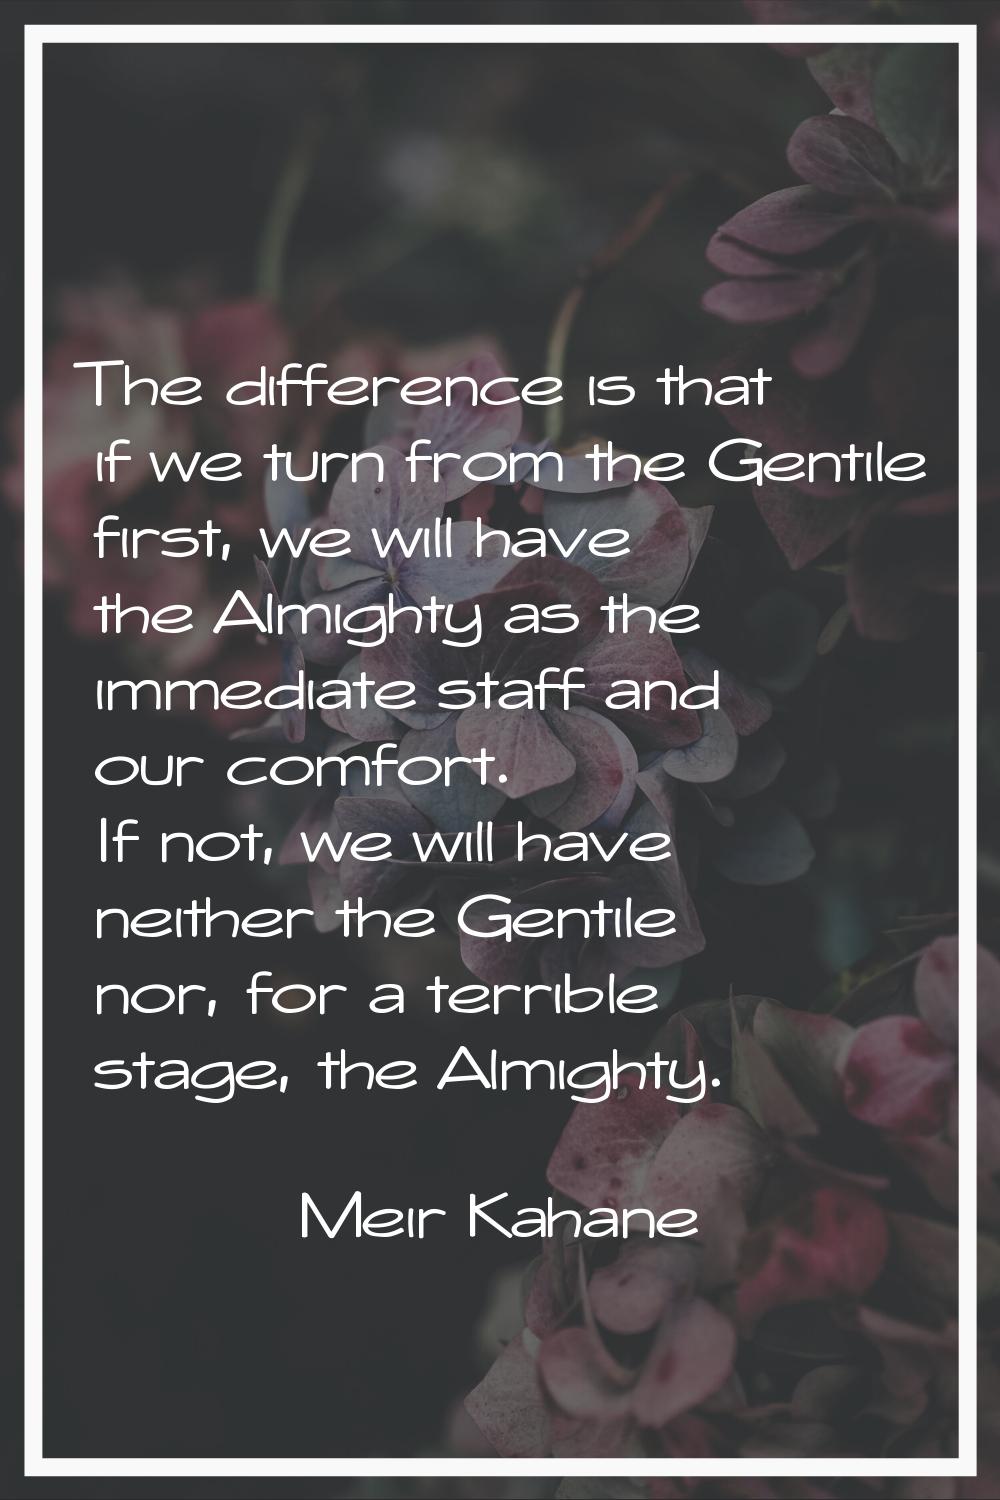 The difference is that if we turn from the Gentile first, we will have the Almighty as the immediat